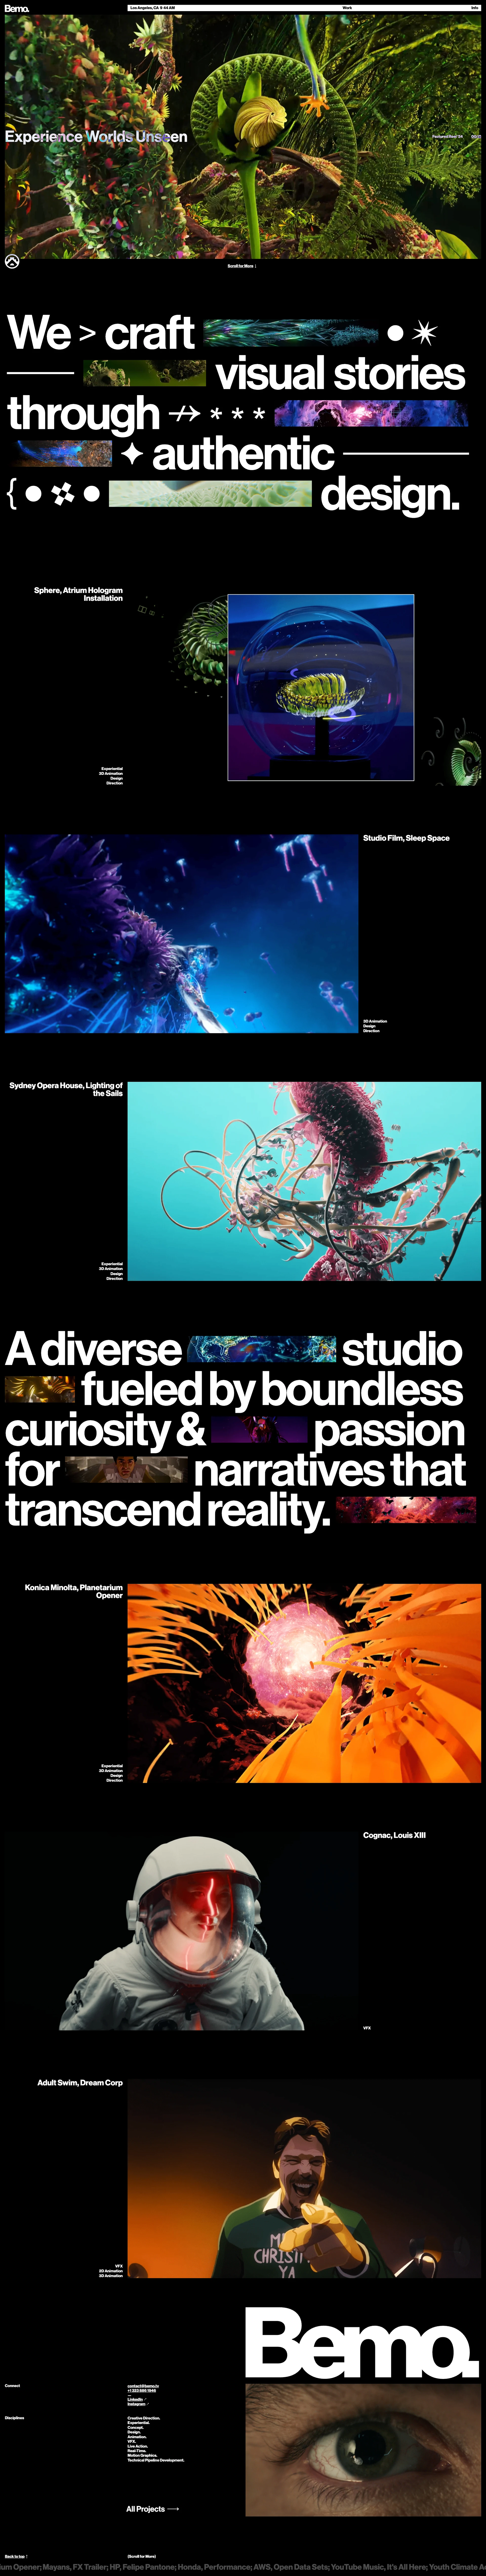 Bemo Landing Page Example: Experience design crafted in stories untold. We create art to visualize unseen worlds that spark curiosity and imagination. We are passionate about design and communicate narrative with purpose. Our methods are shaped by this unyielding vision, resulting in a robust multimedia creative studio.